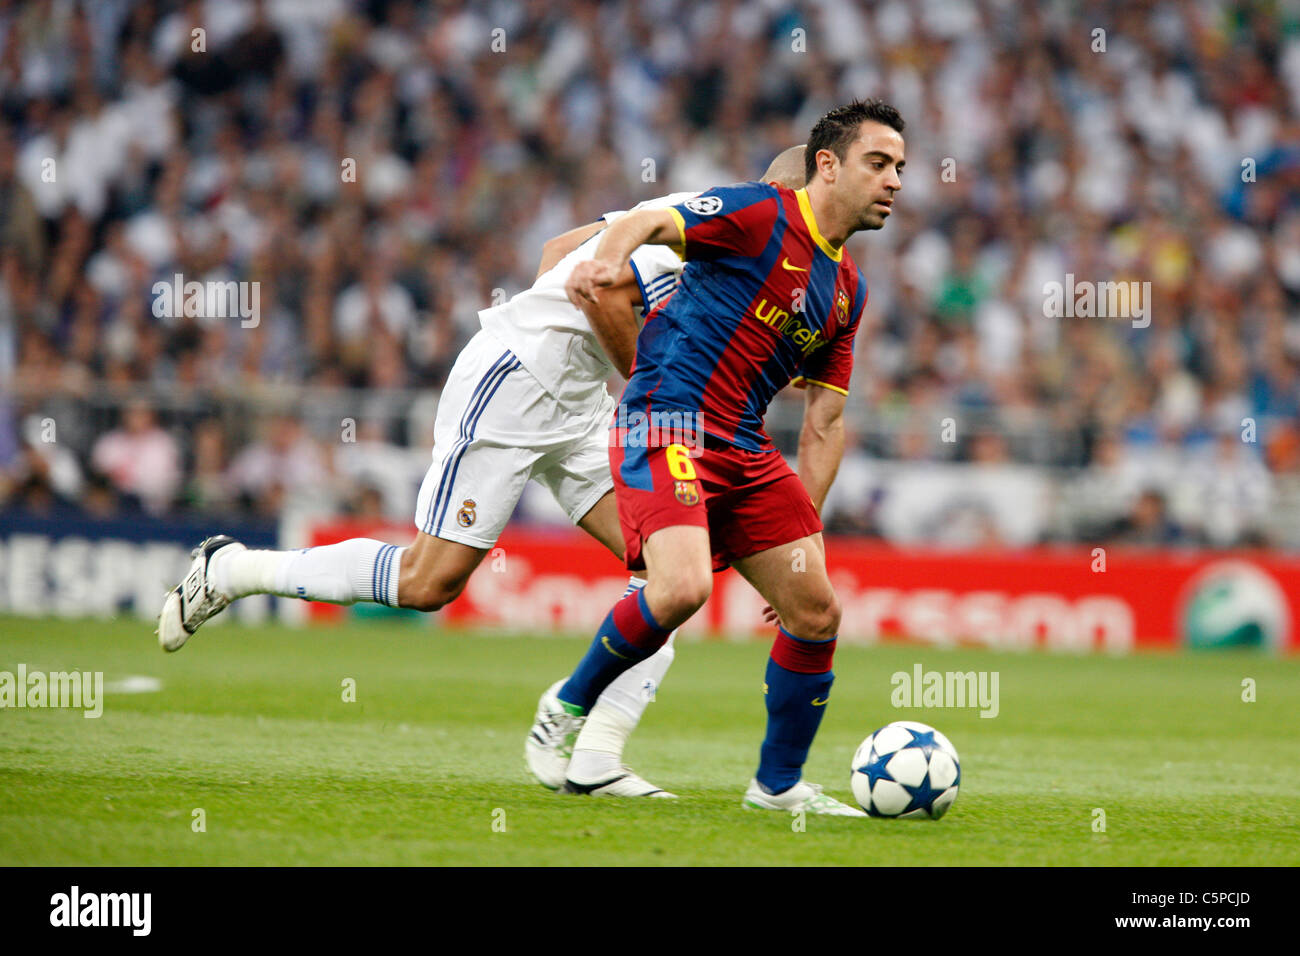 Xavi with the ball, UEFA Champions League Semifinals game between Real  Madrid and FC Barcelona, Bernabeu Stadiumn, Madrid, Spain Stock Photo -  Alamy